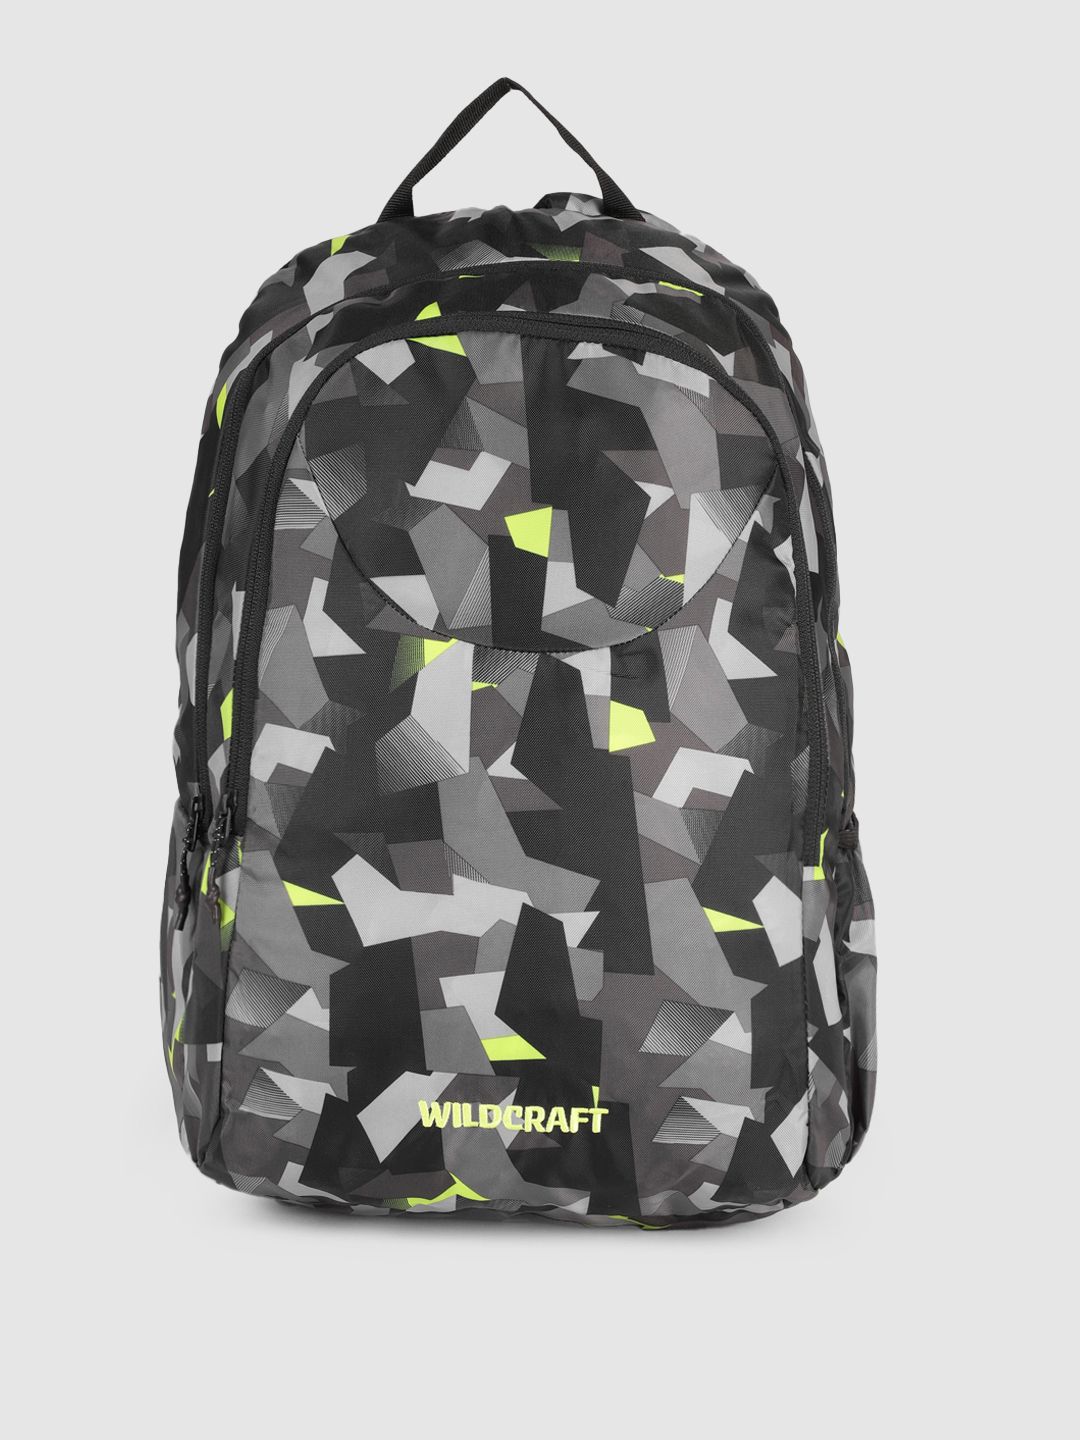 Wildcraft Unisex Grey & Black Graphic Arial DC Backpack Price in India